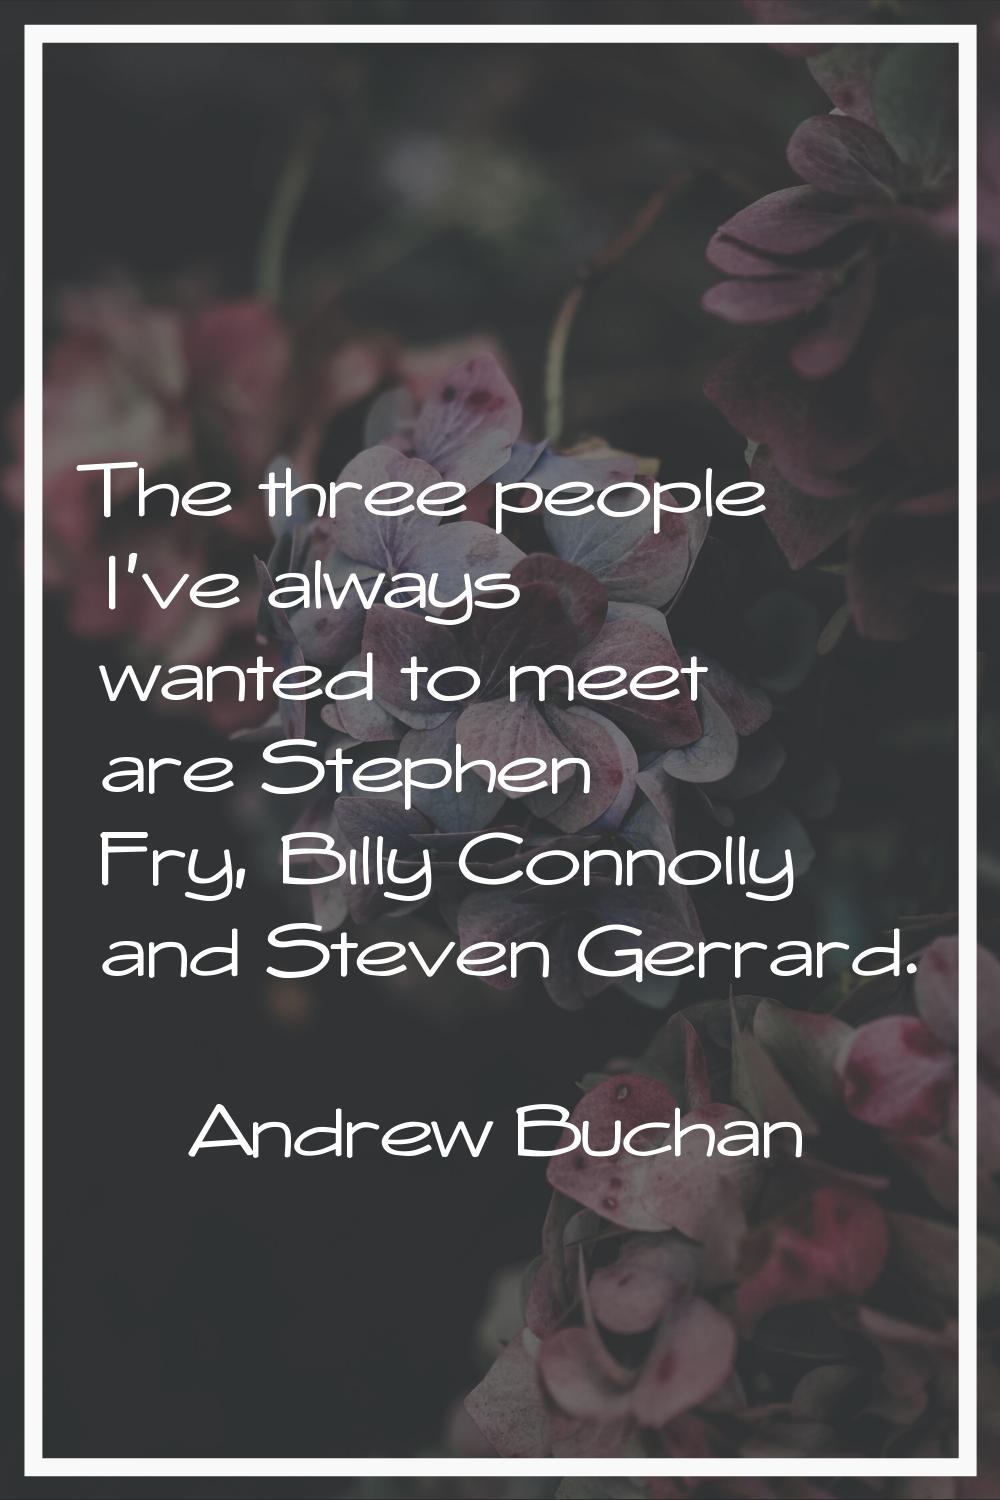 The three people I've always wanted to meet are Stephen Fry, Billy Connolly and Steven Gerrard.